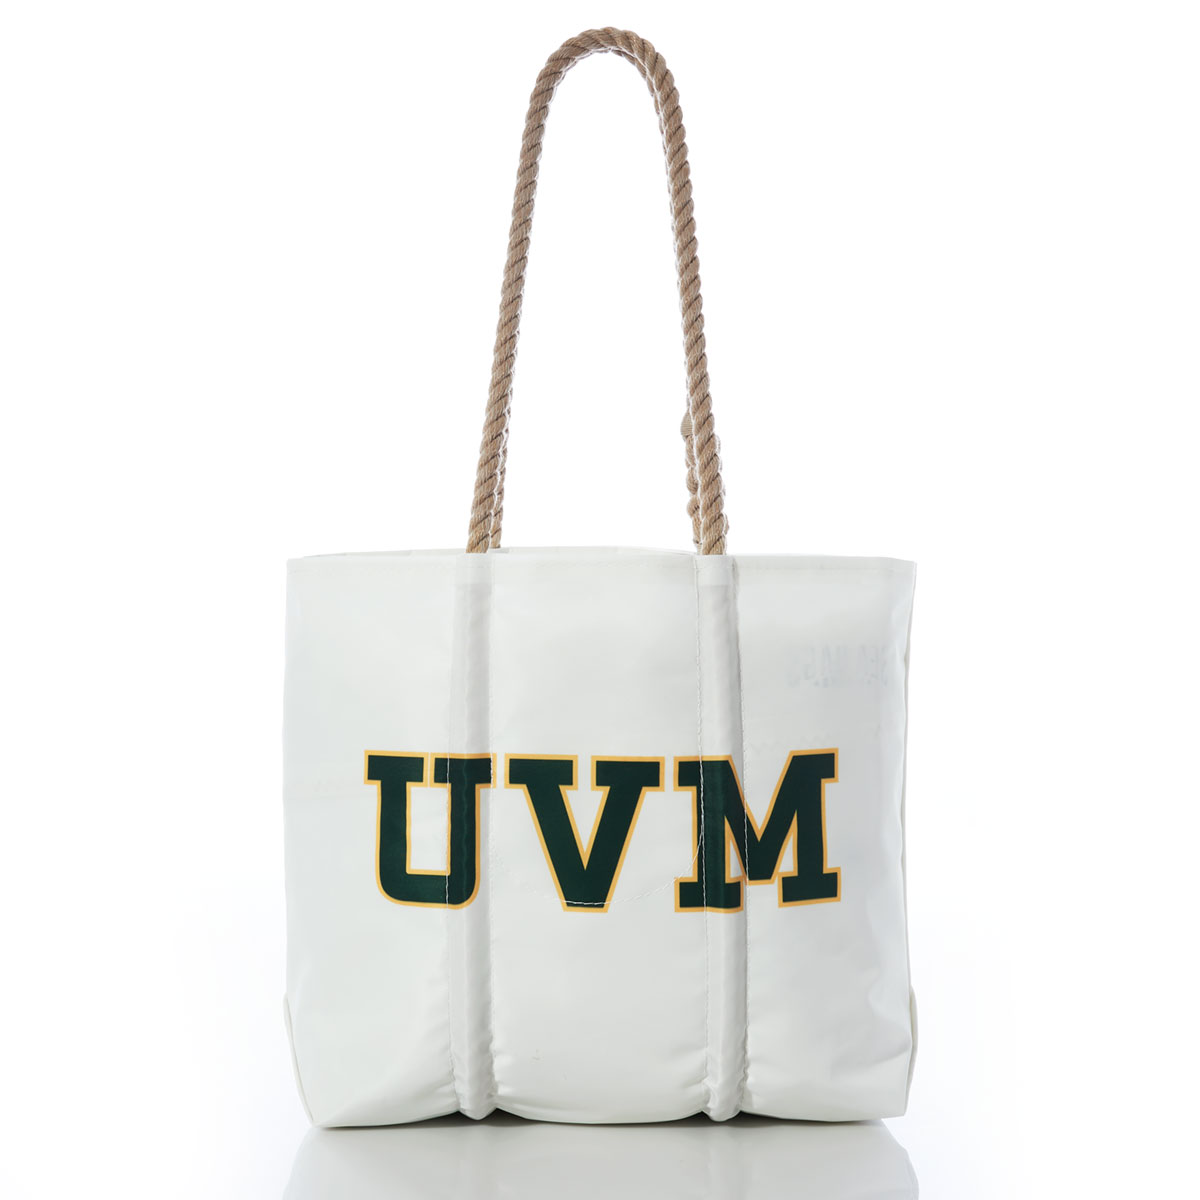 back view of a white recycled sail cloth tote with hemp rope handles is printed with UVM in green